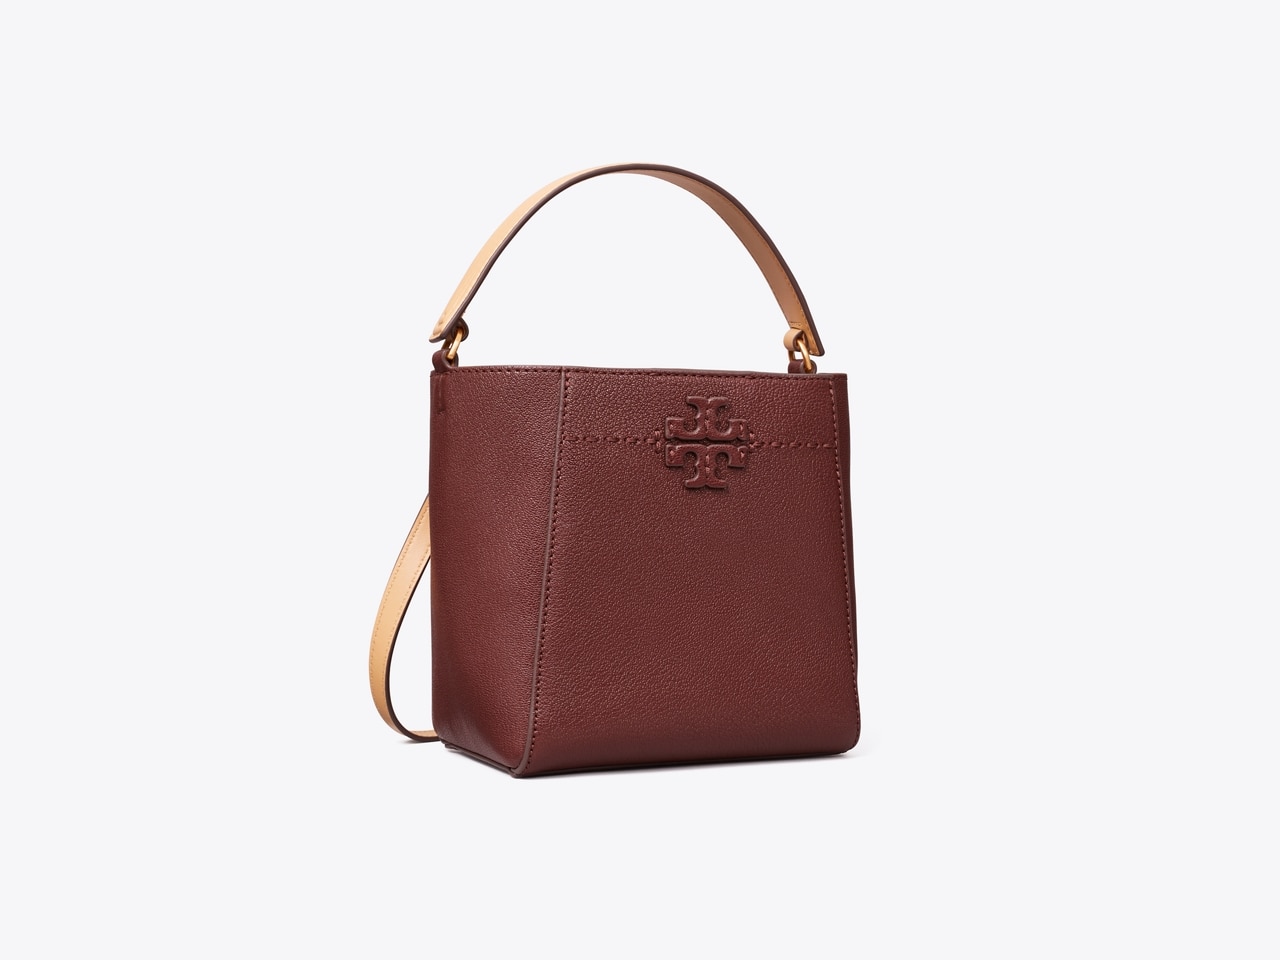 Tory Burch McGraw Textured Leather Camera Bag